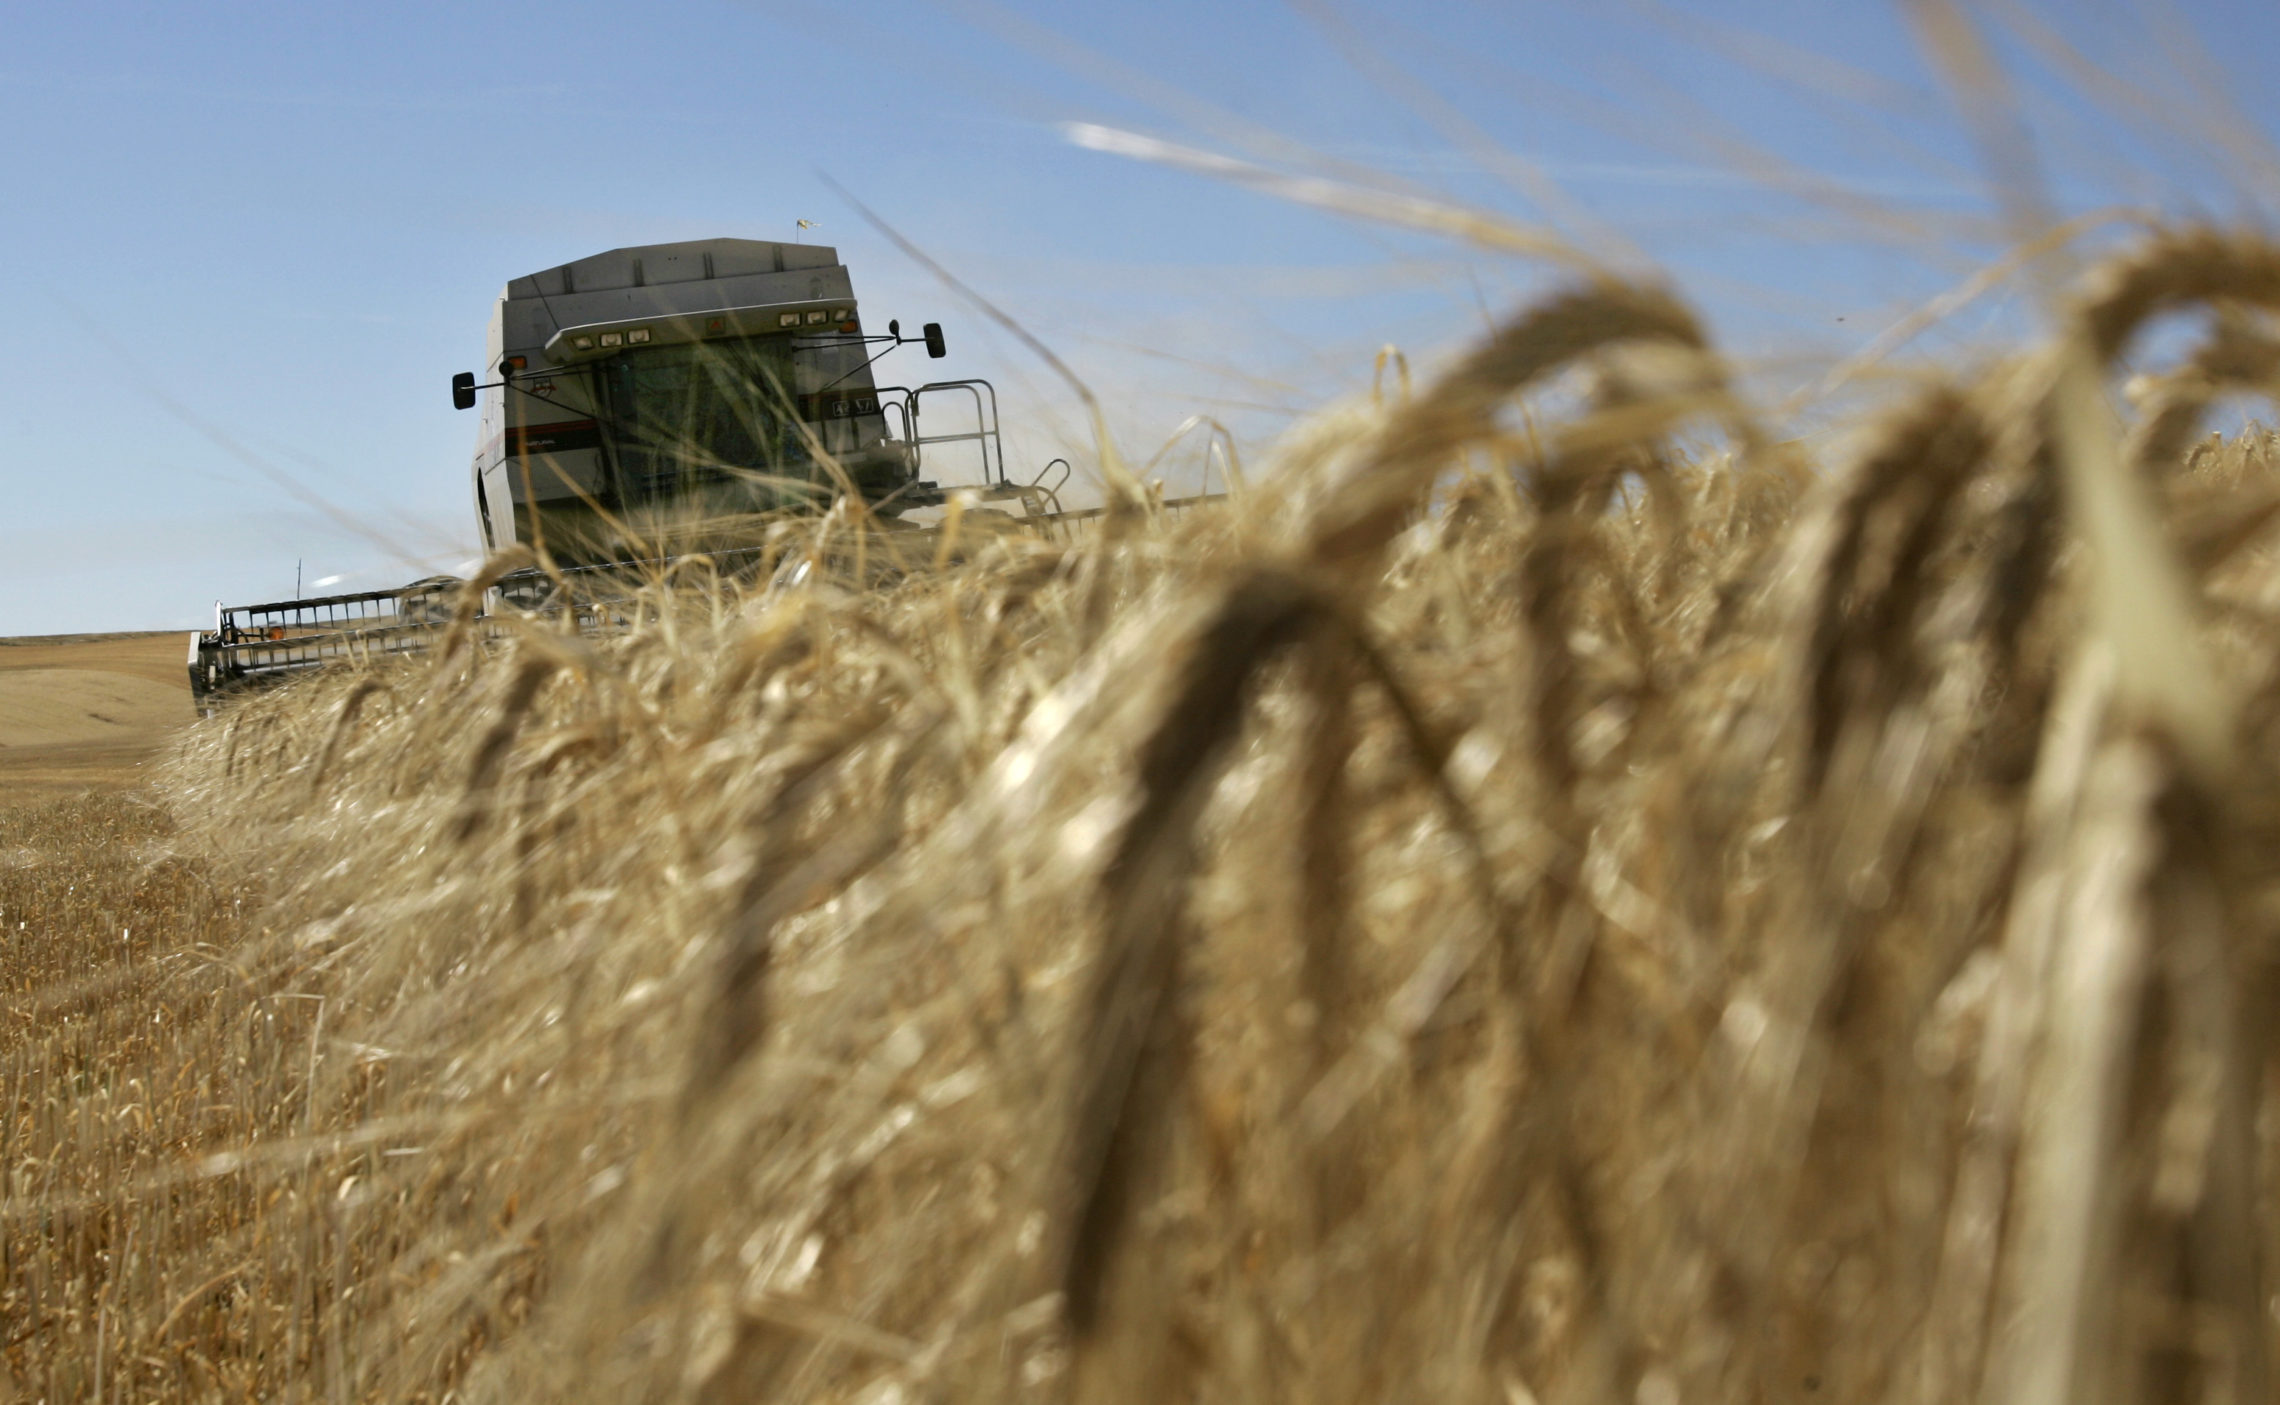 Larry McMillan drives a combine as he harvests barley Friday, Aug. 24, 2007, near Moscow, Idaho. The region's warm and dry weather has provided optimal conditions for the continued harvest season. (AP Photo/Ted S. Warren)